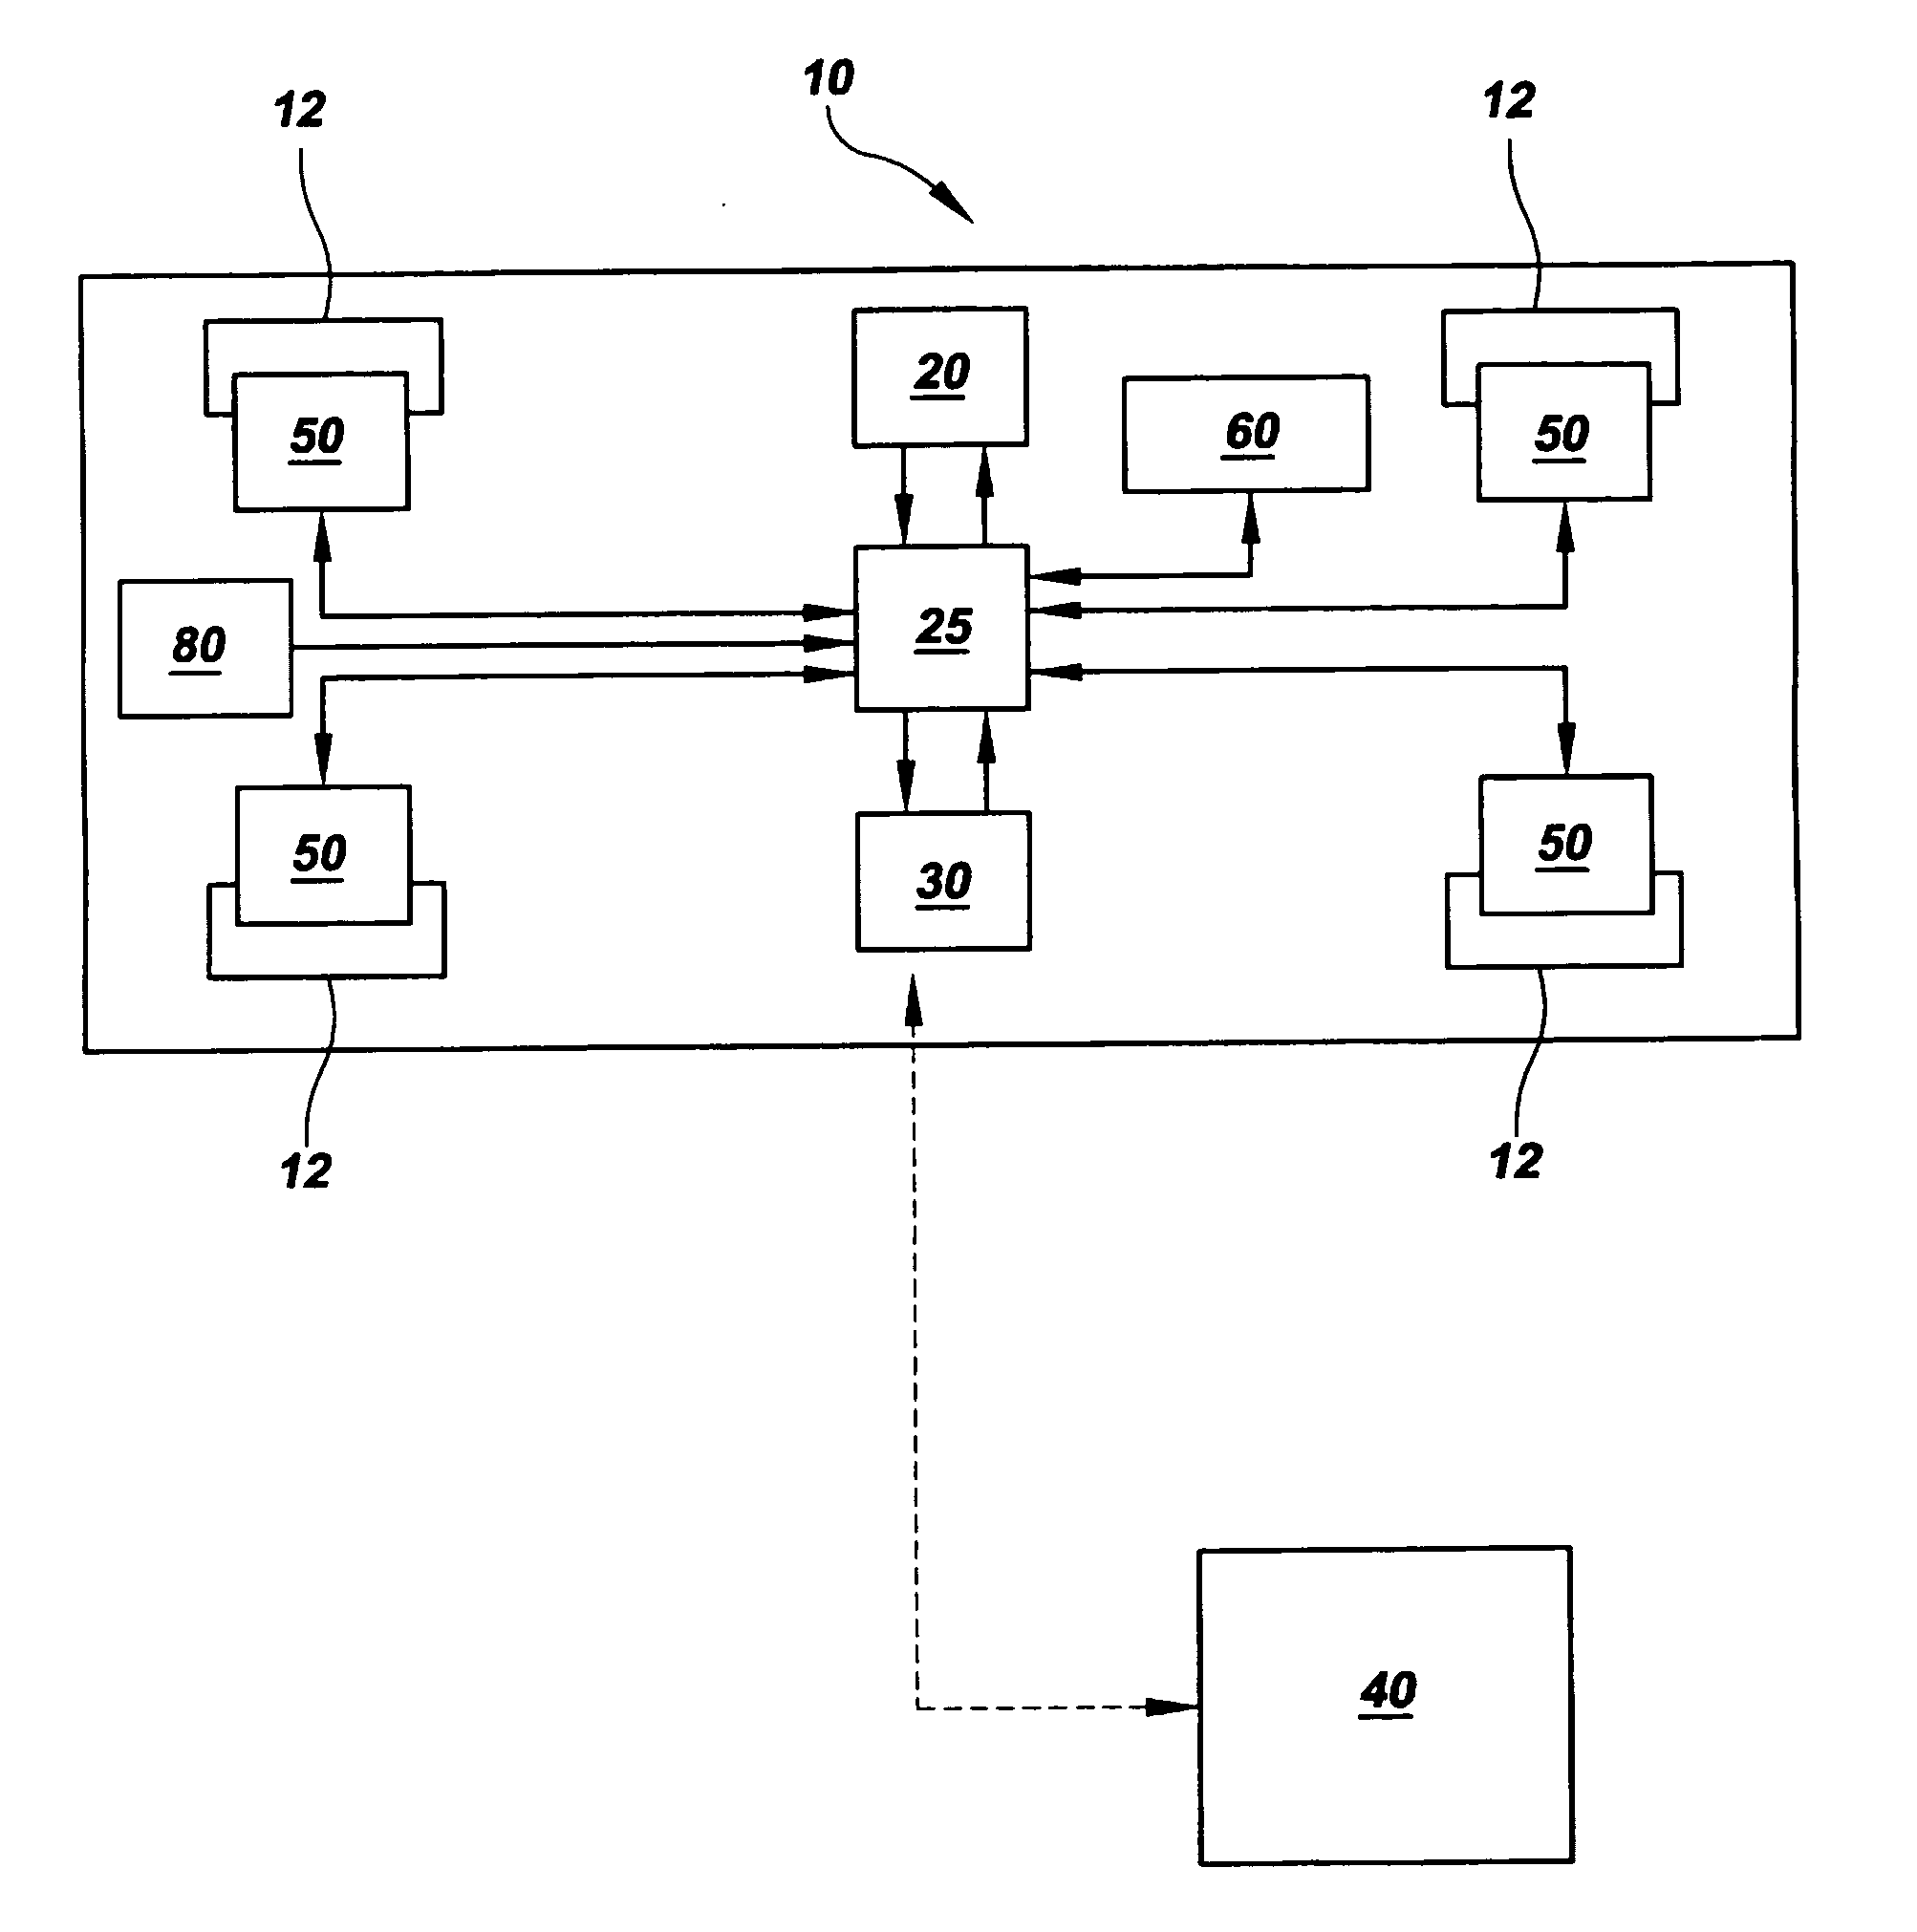 Tire management system and method